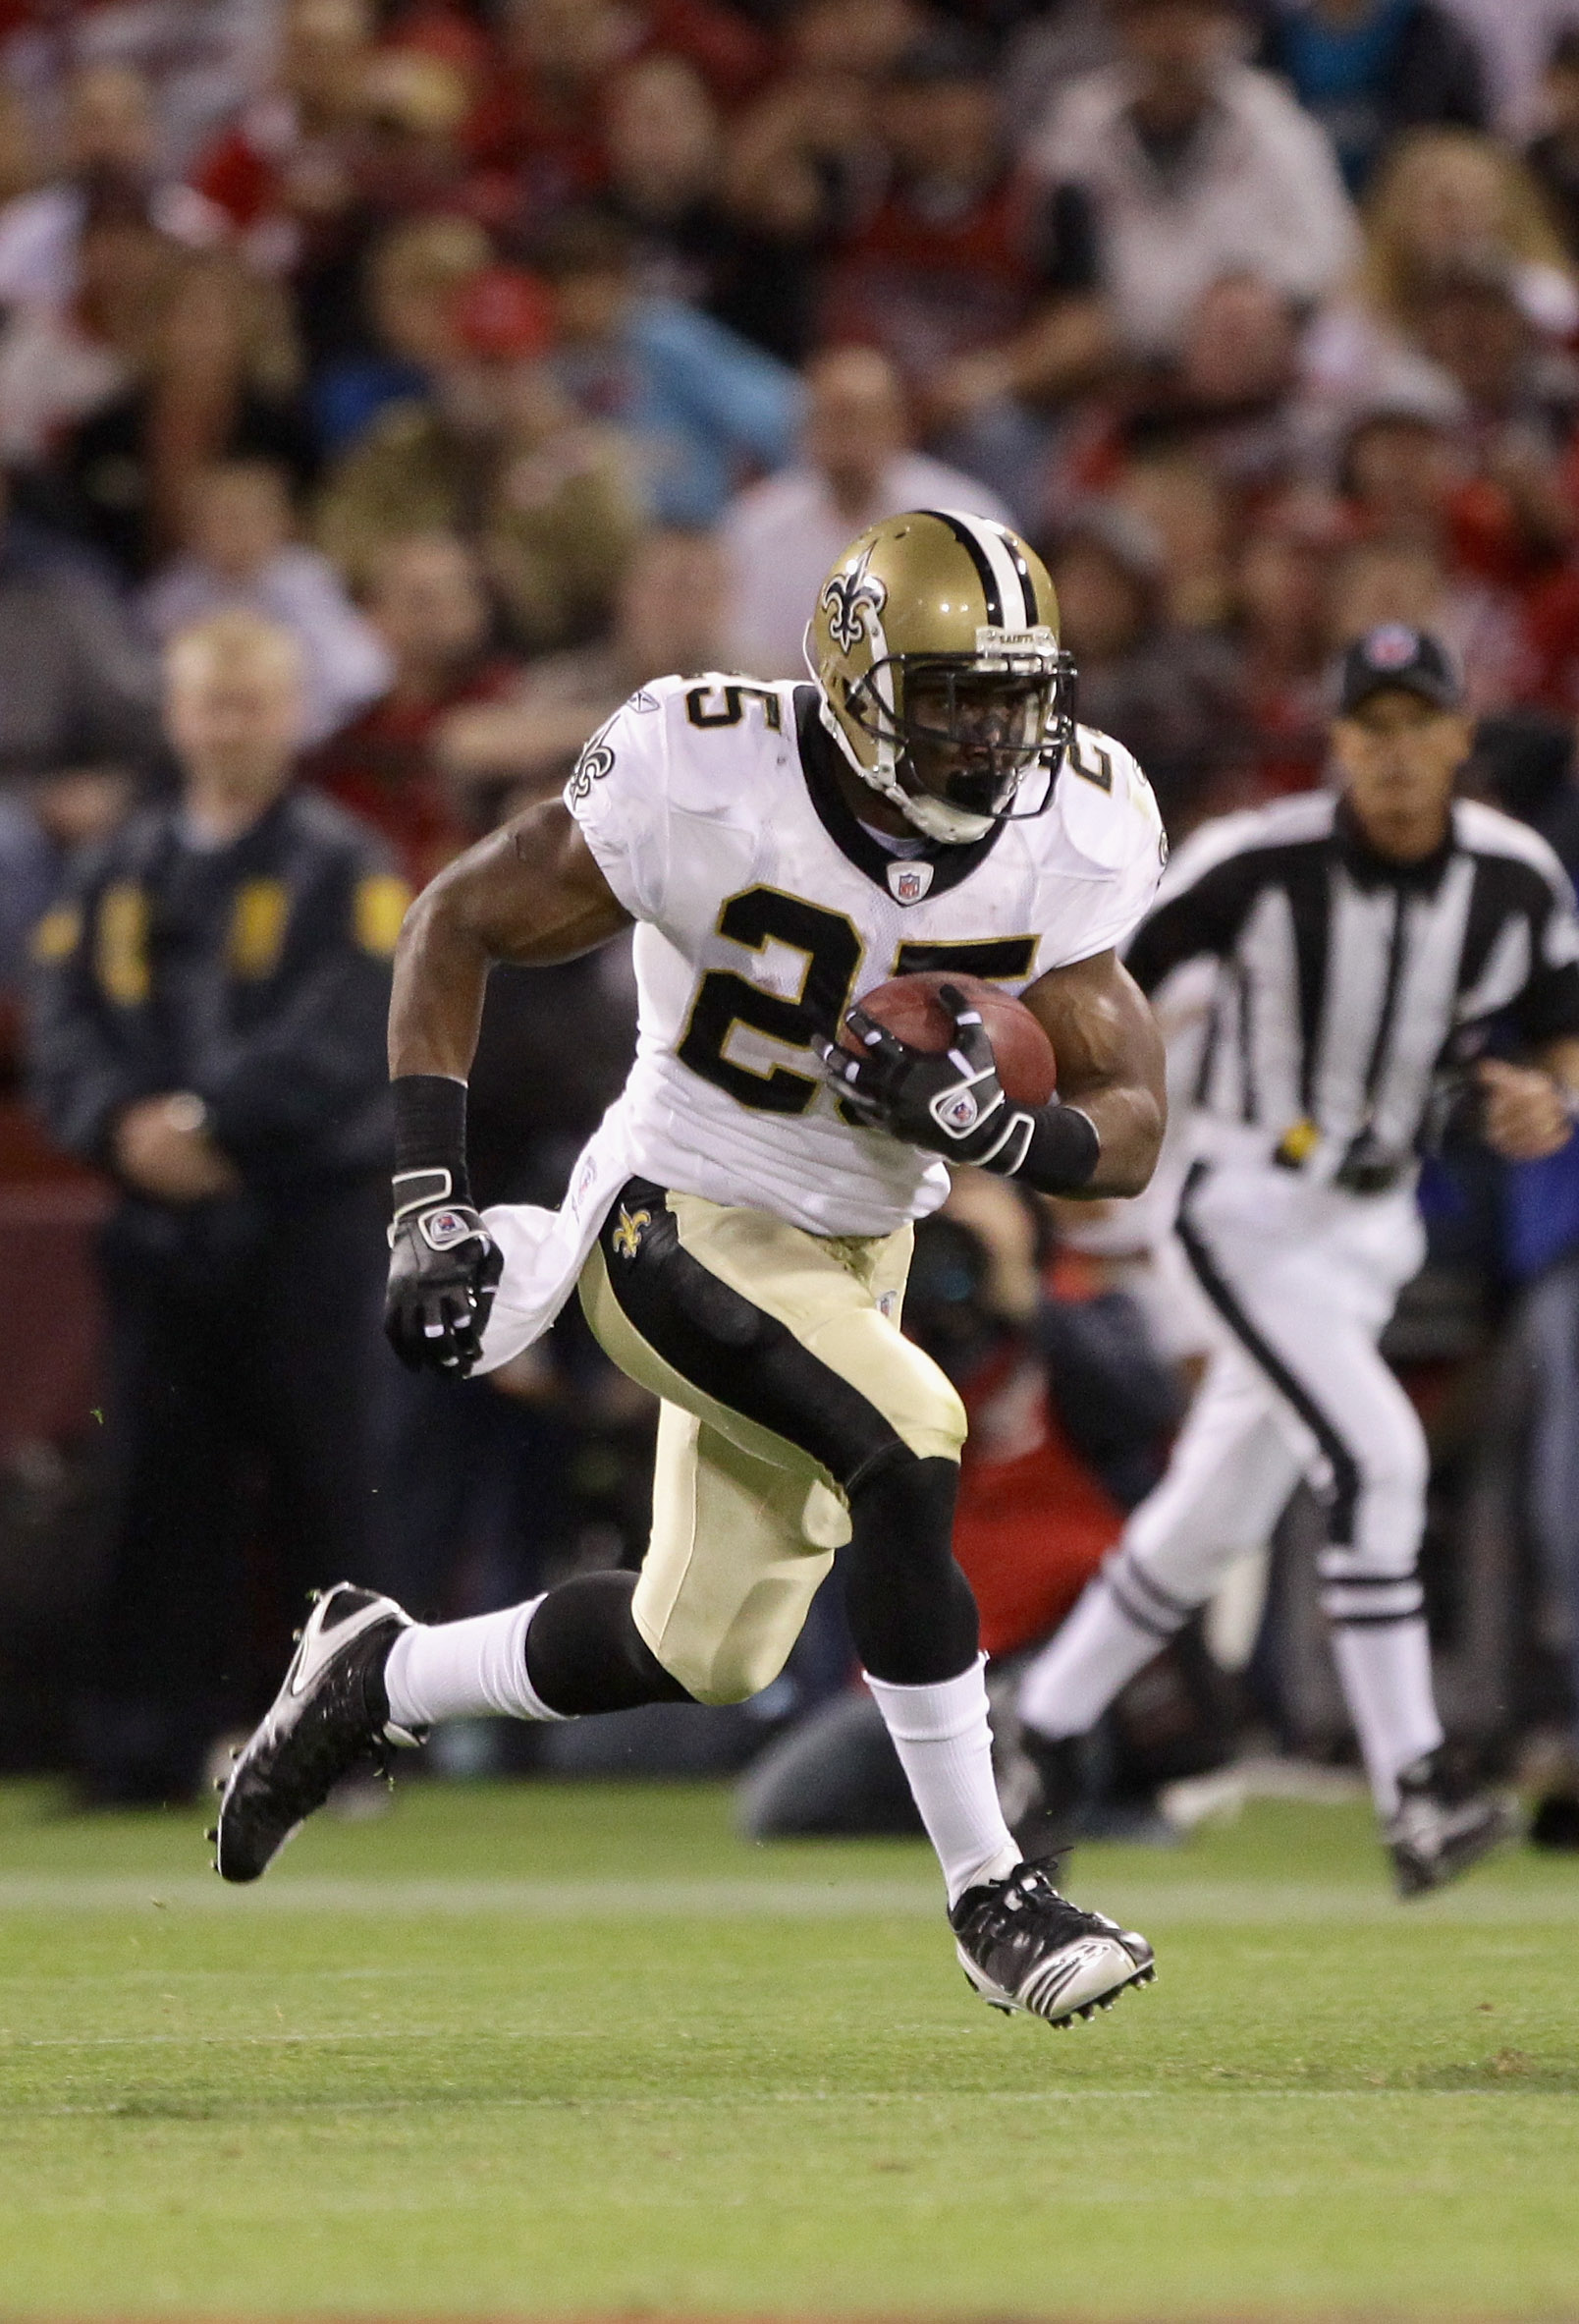 SAN FRANCISCO - SEPTEMBER 20:  Reggie Bush #25 of the New Orleans Saints in action during their game against the San Francisco 49ers at Candlestick Park on September 20, 2010 in San Francisco, California.  (Photo by Ezra Shaw/Getty Images)